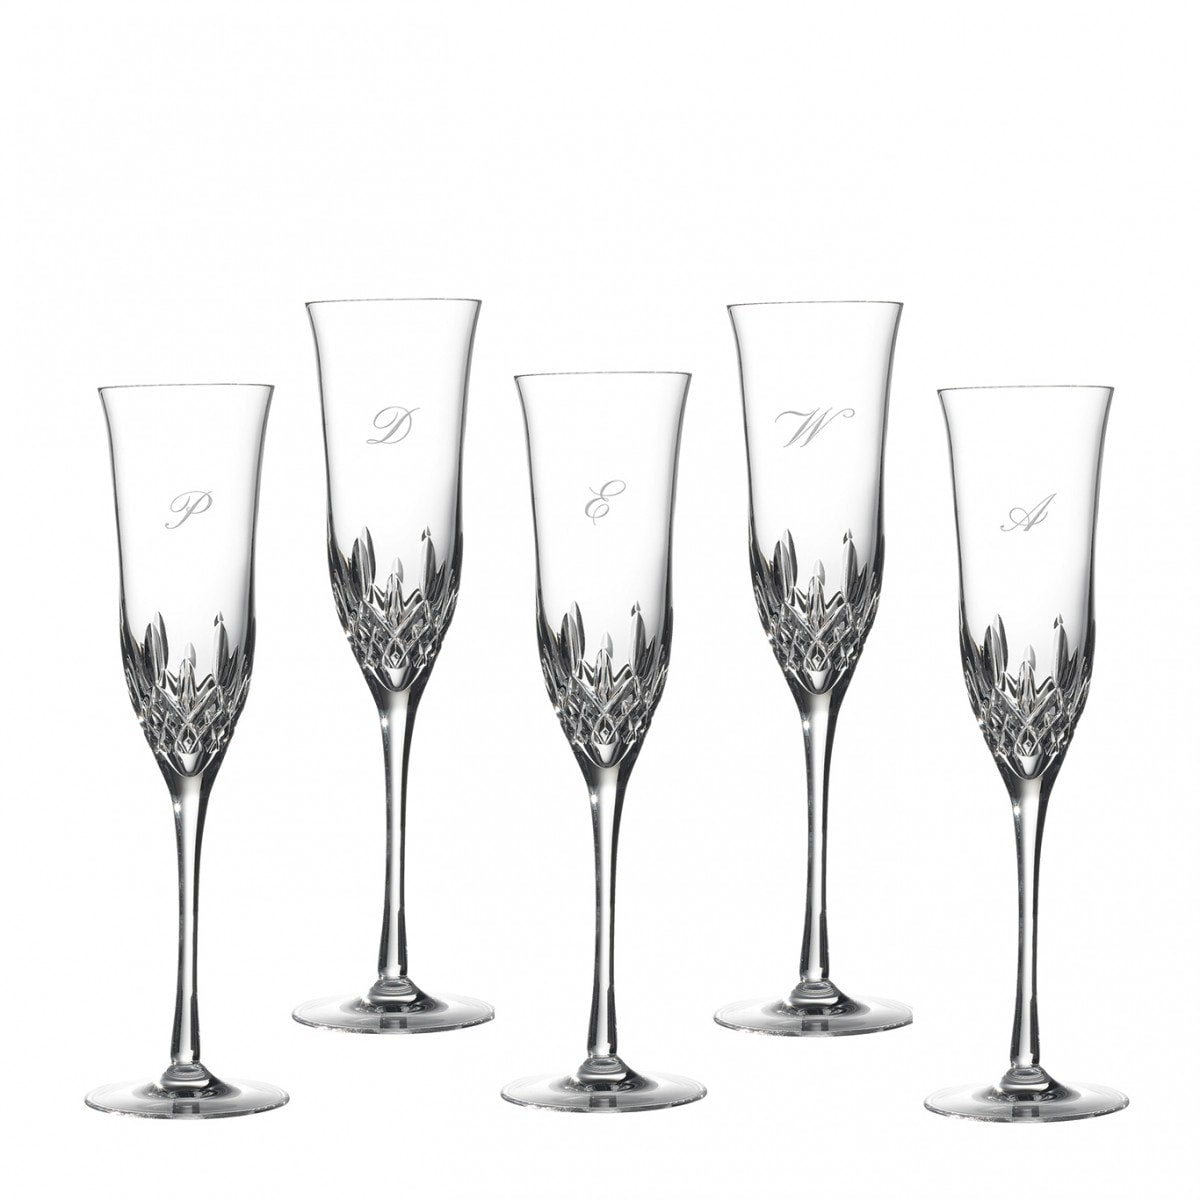 Waterford - Lismore Essence Champagne Flute - Set of 2